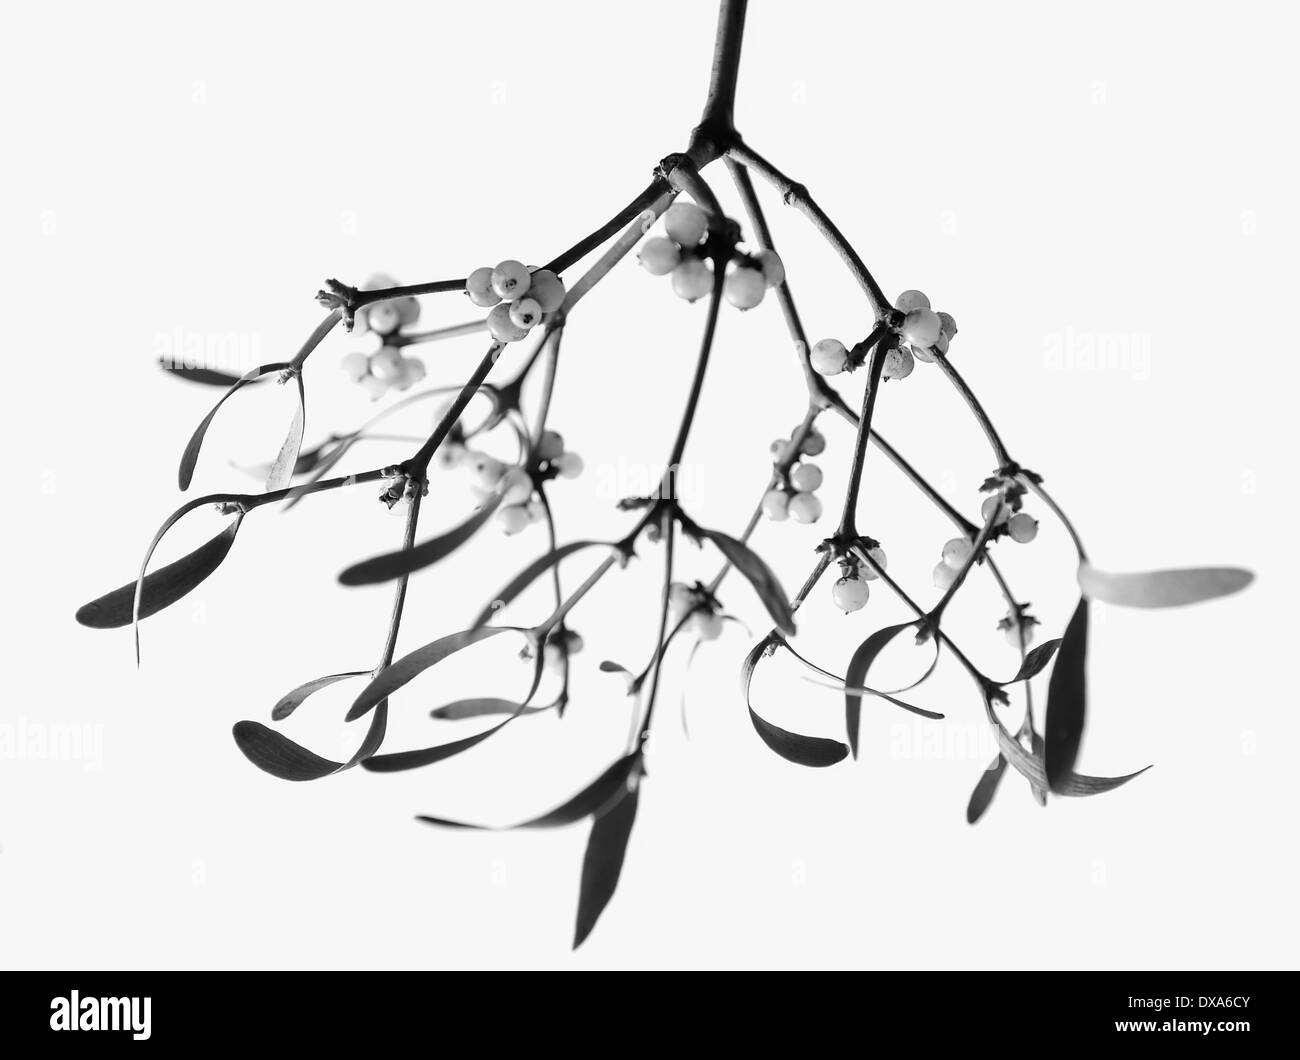 Mistletoe, Viscum album. a black and white shot of a bunch hanging down with white berries against white background. Stock Photo